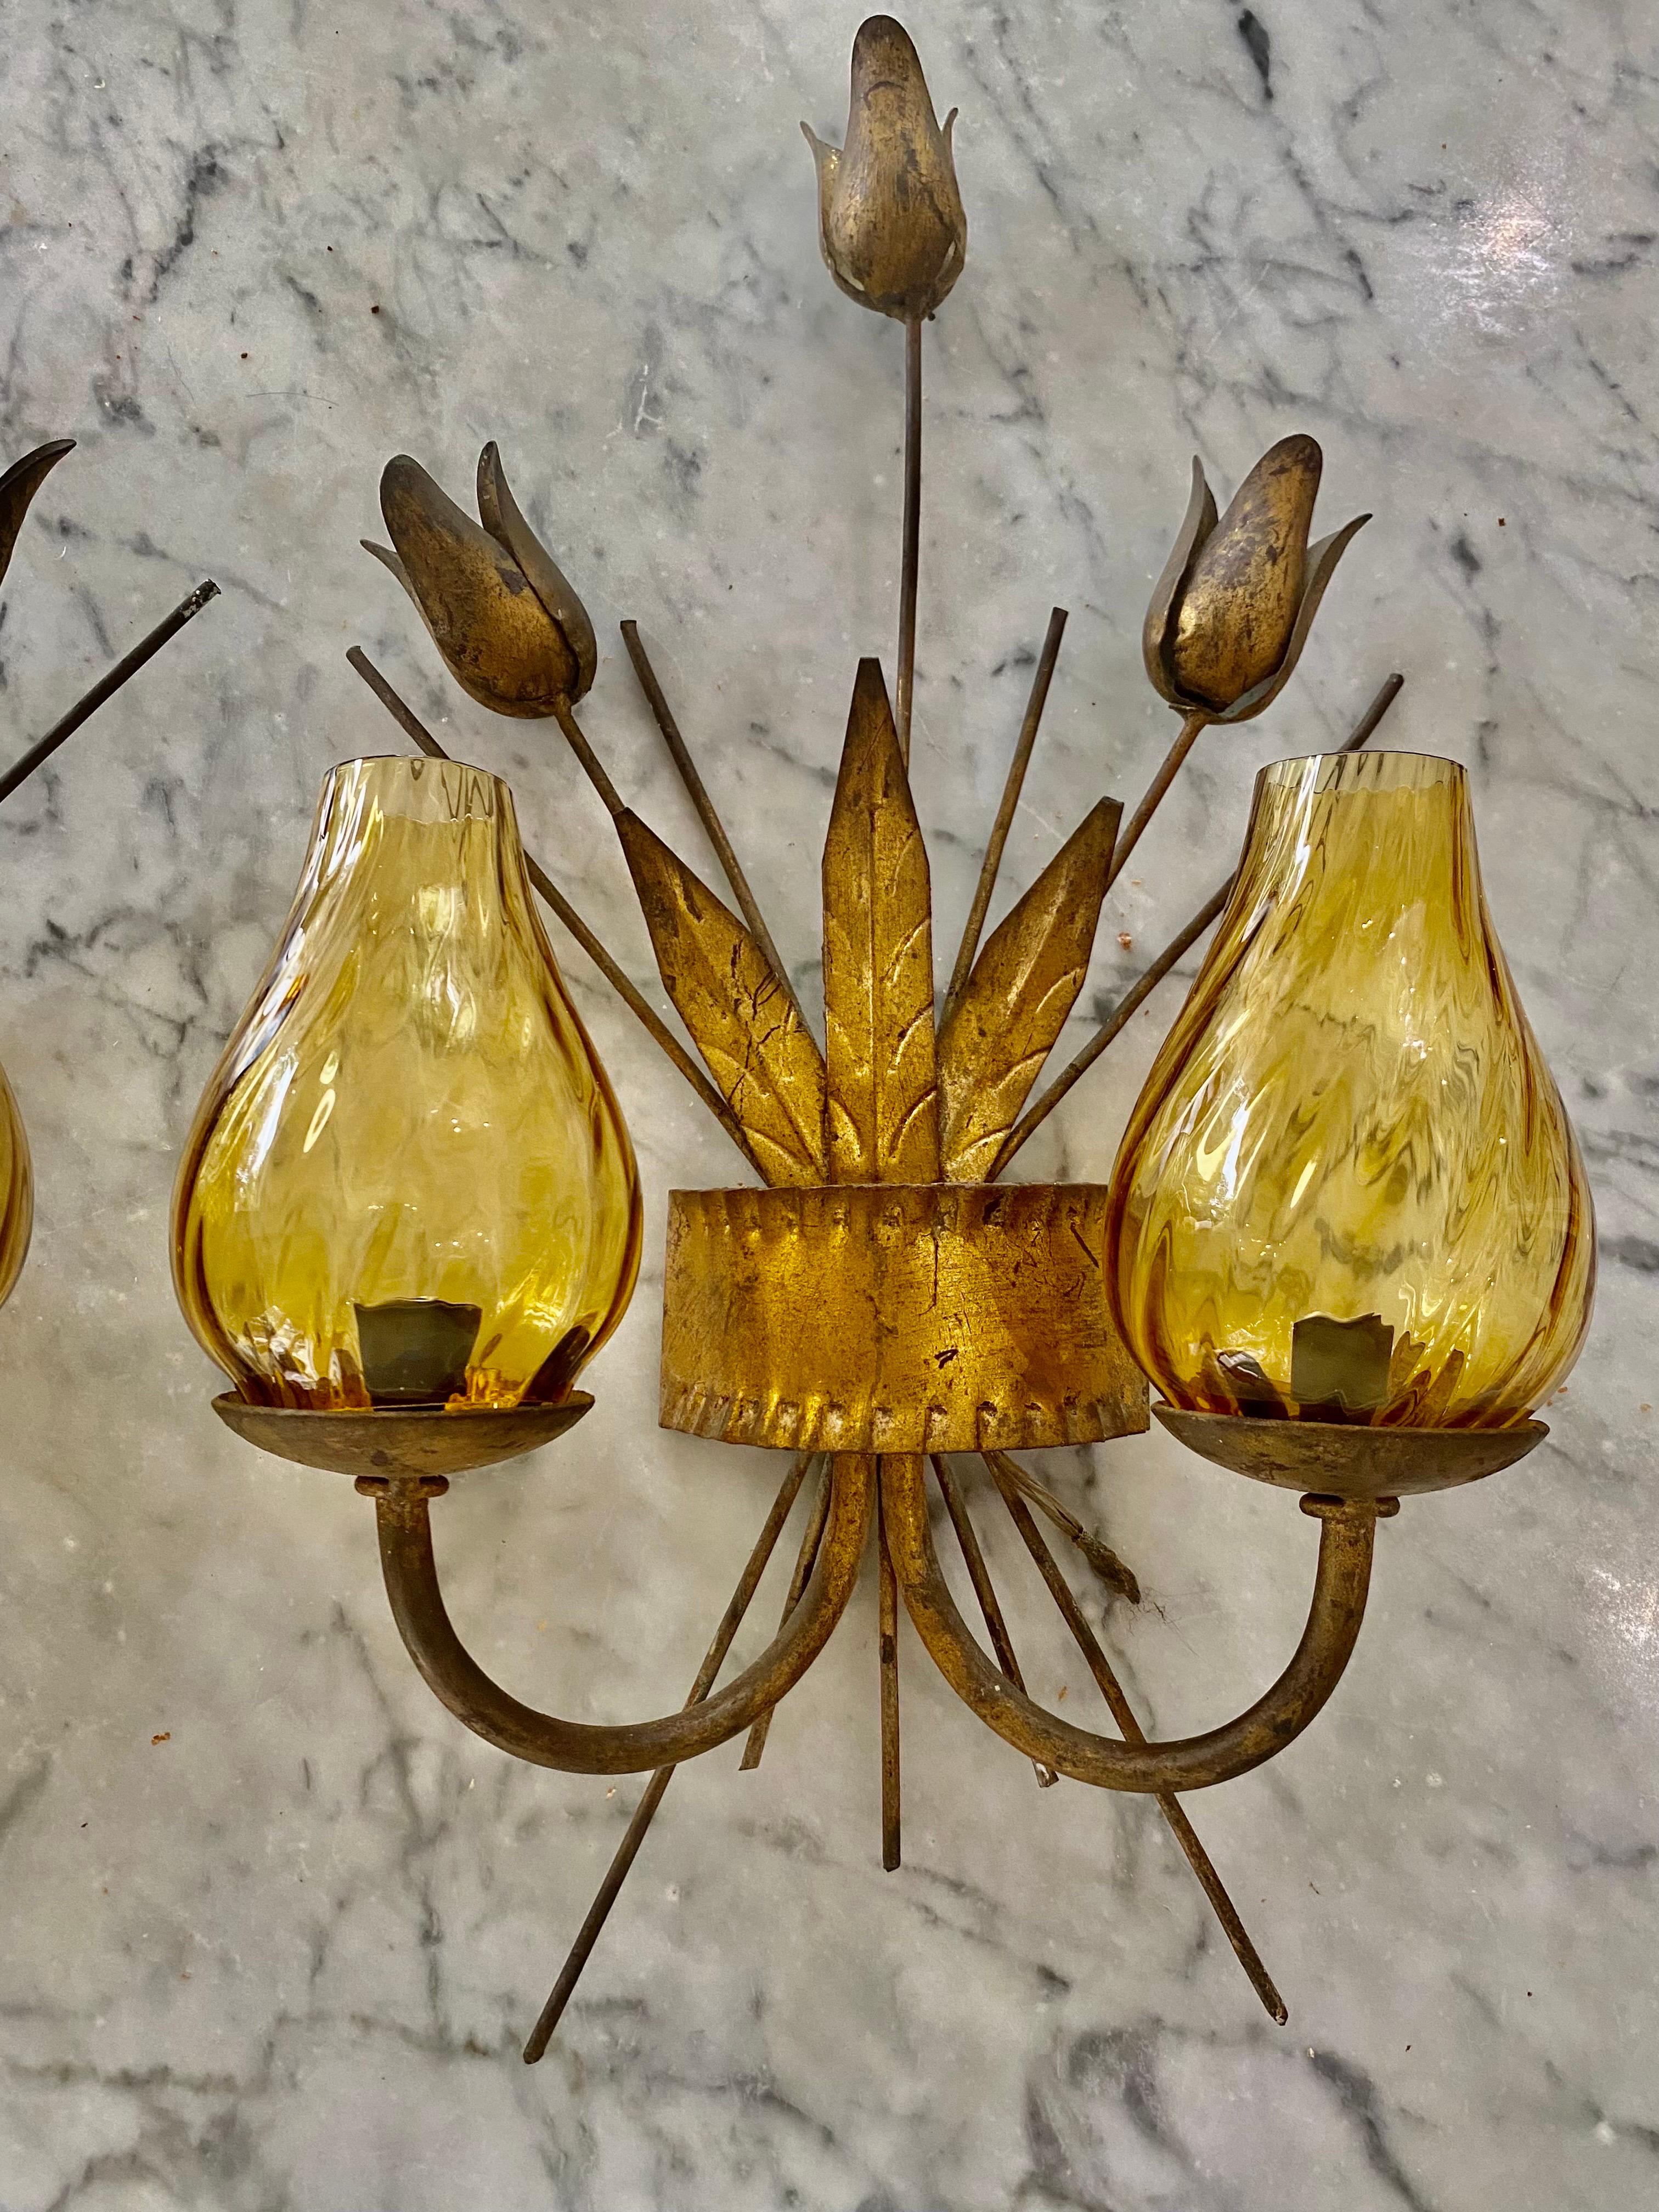 Wonderful old Spanish 1950s two light metal wall sconces with tulip flowers and golden leaves, in a beautiful quirky shape. Traditional handcrafted, Hollywood Regency style. Original wooden candle holders. All parts have been cleaned but without